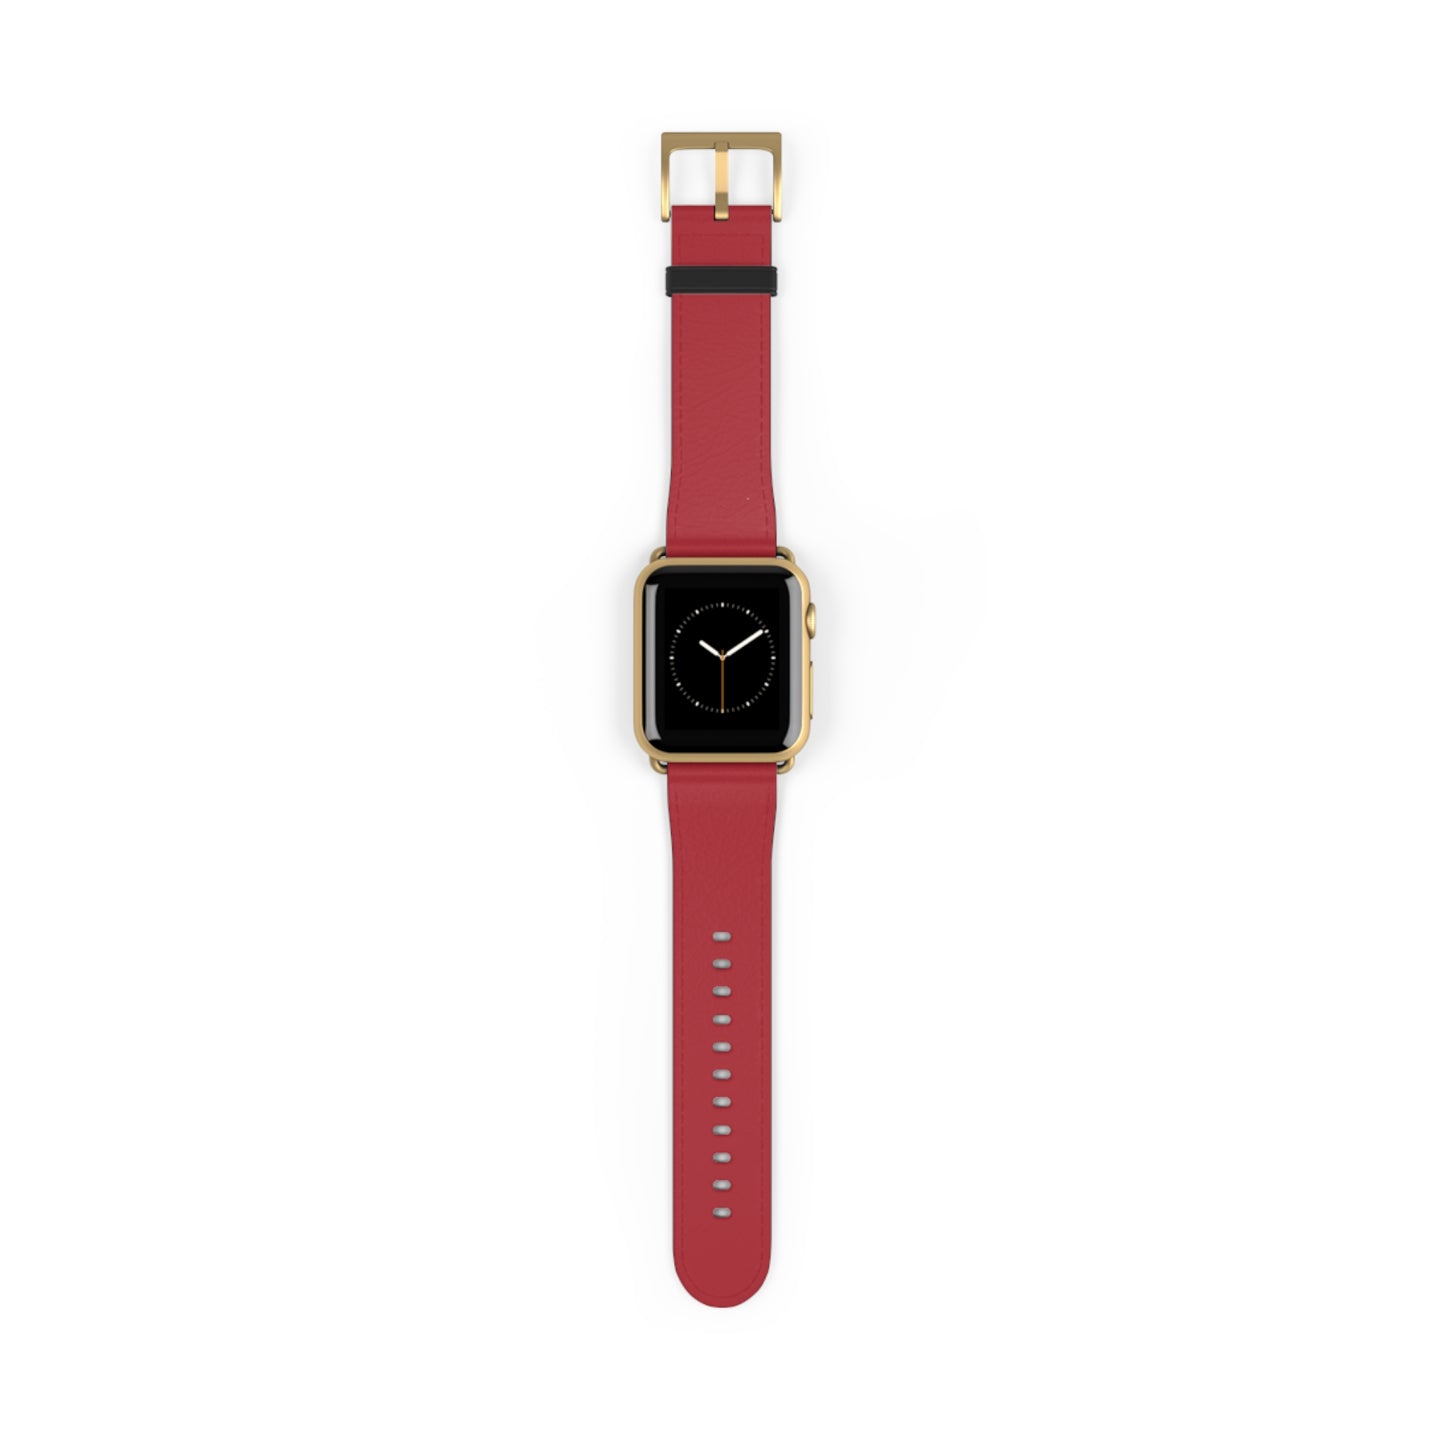 RED APPLE® WATCH BAND- PANTONE® 187